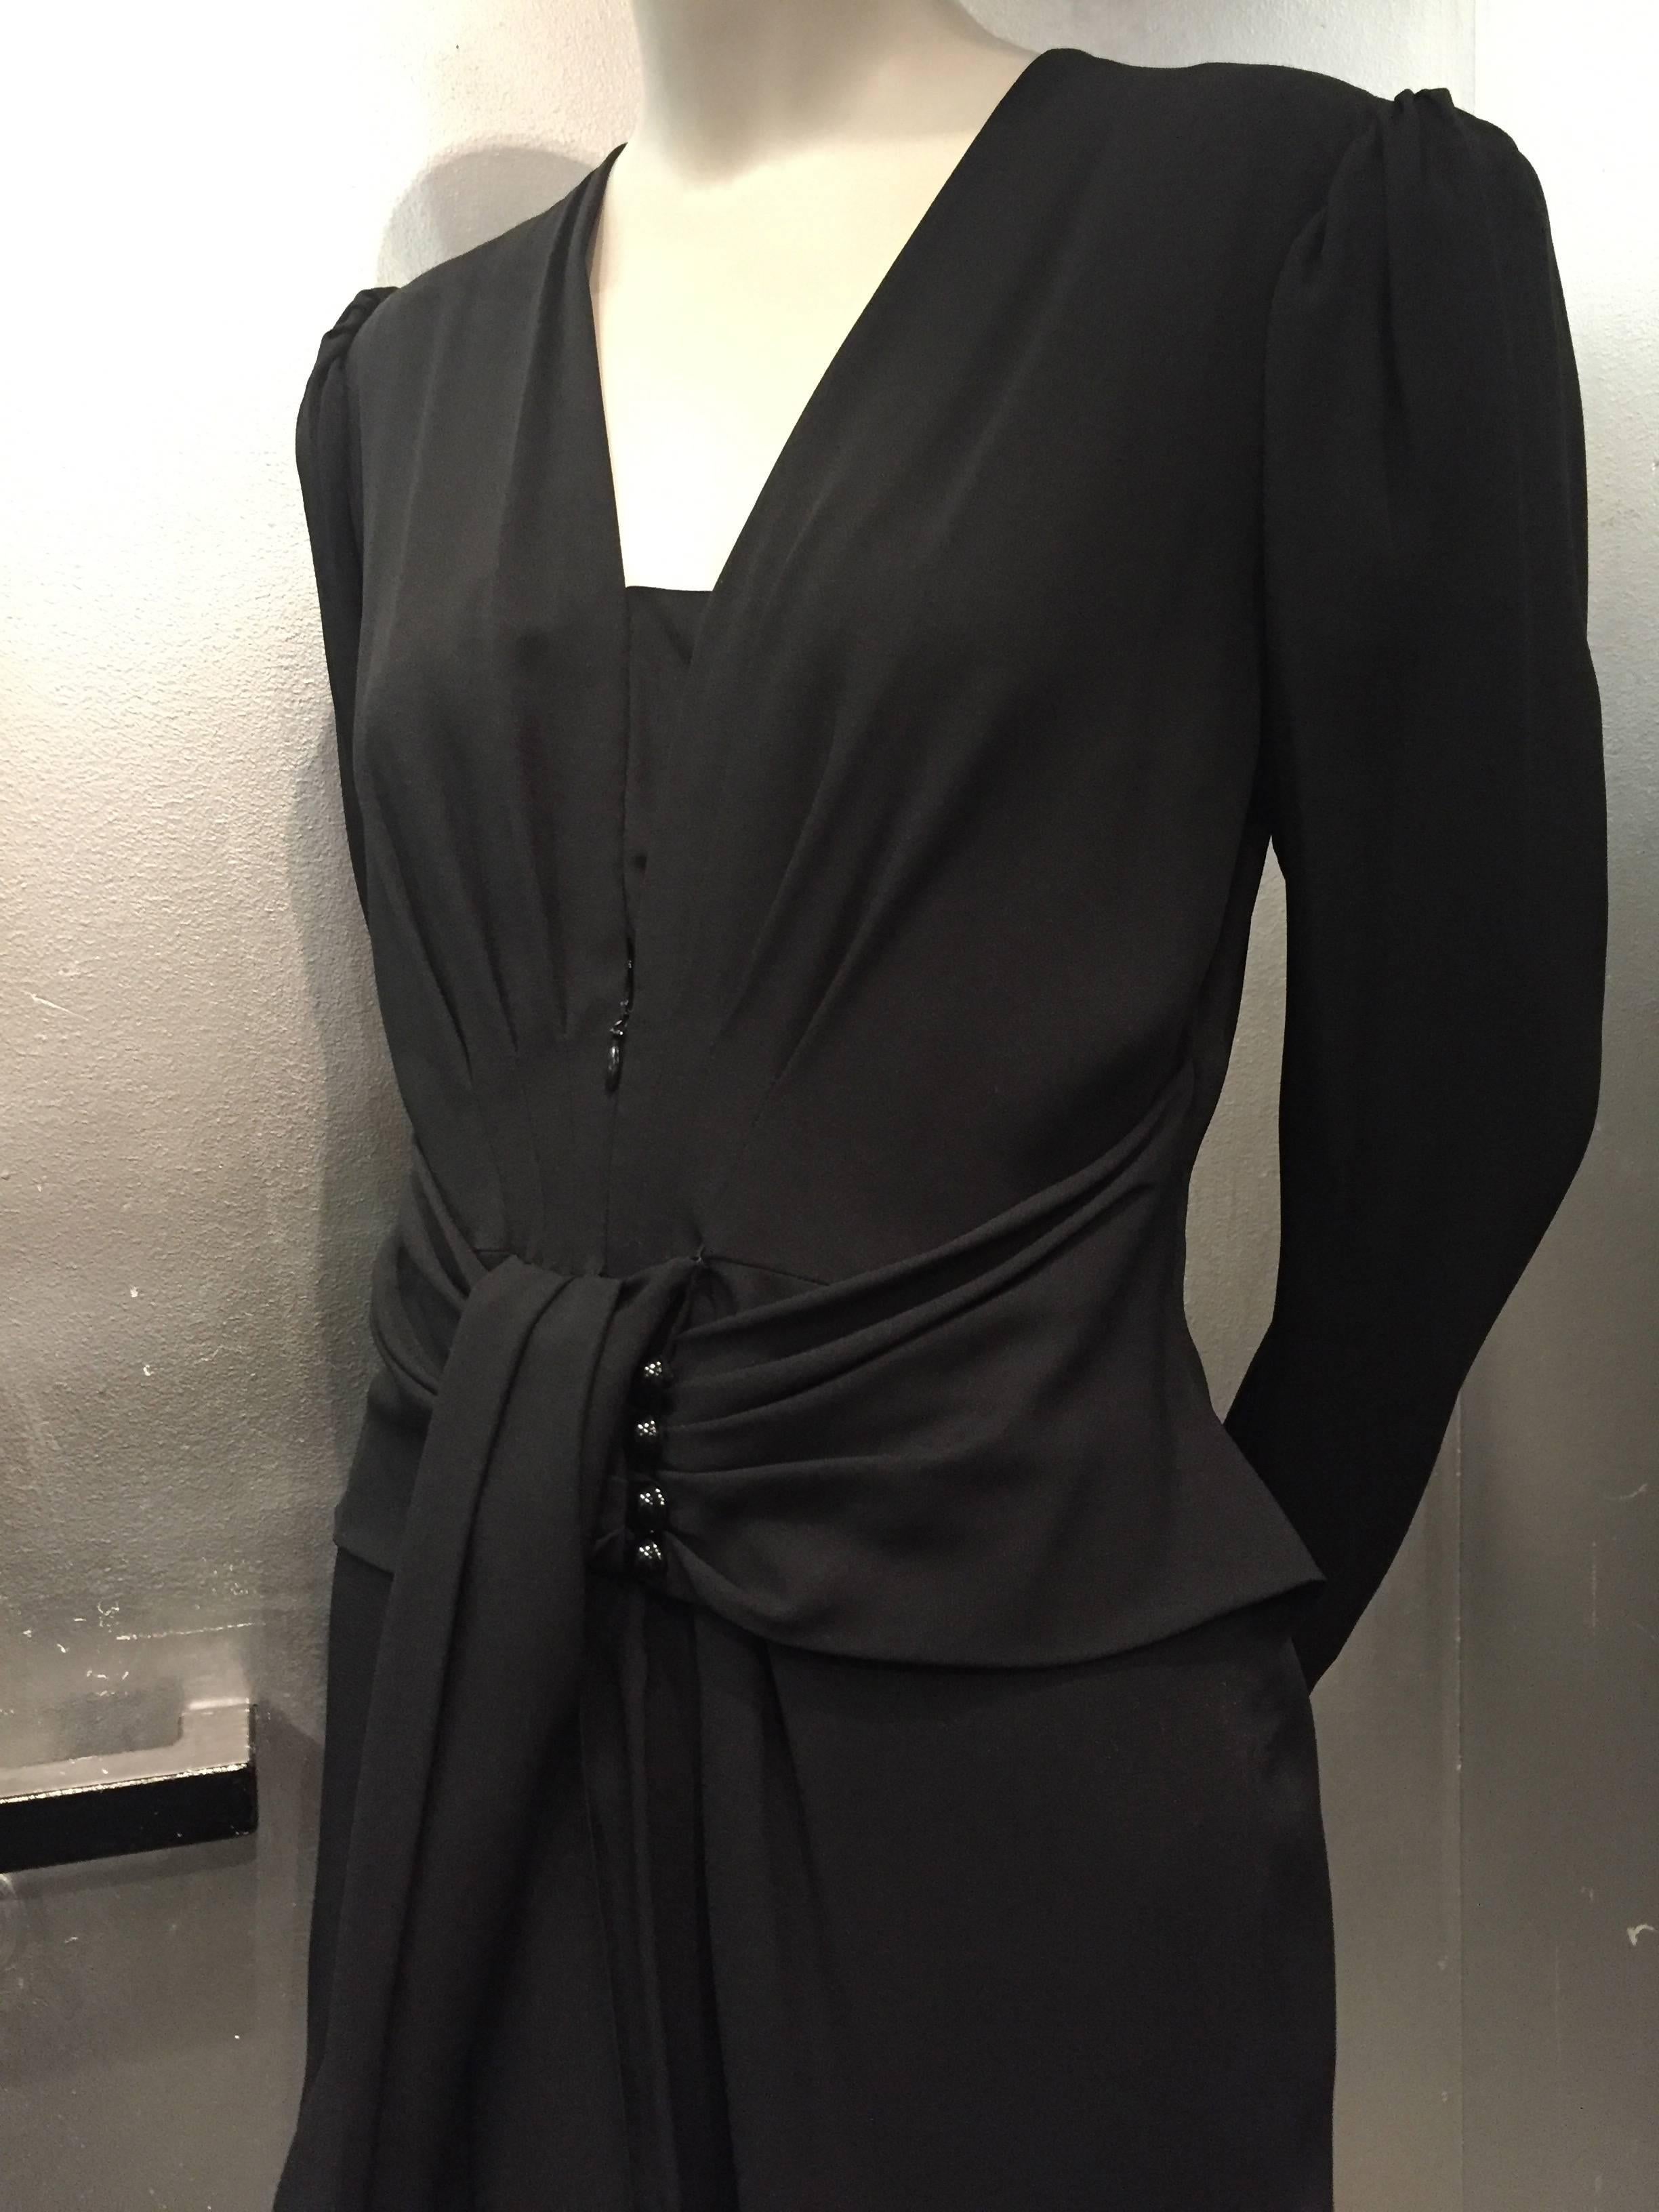 1980s Ted Lapidus Black Crepe Cocktail Dress w/ 1940s-Inspired Style 1